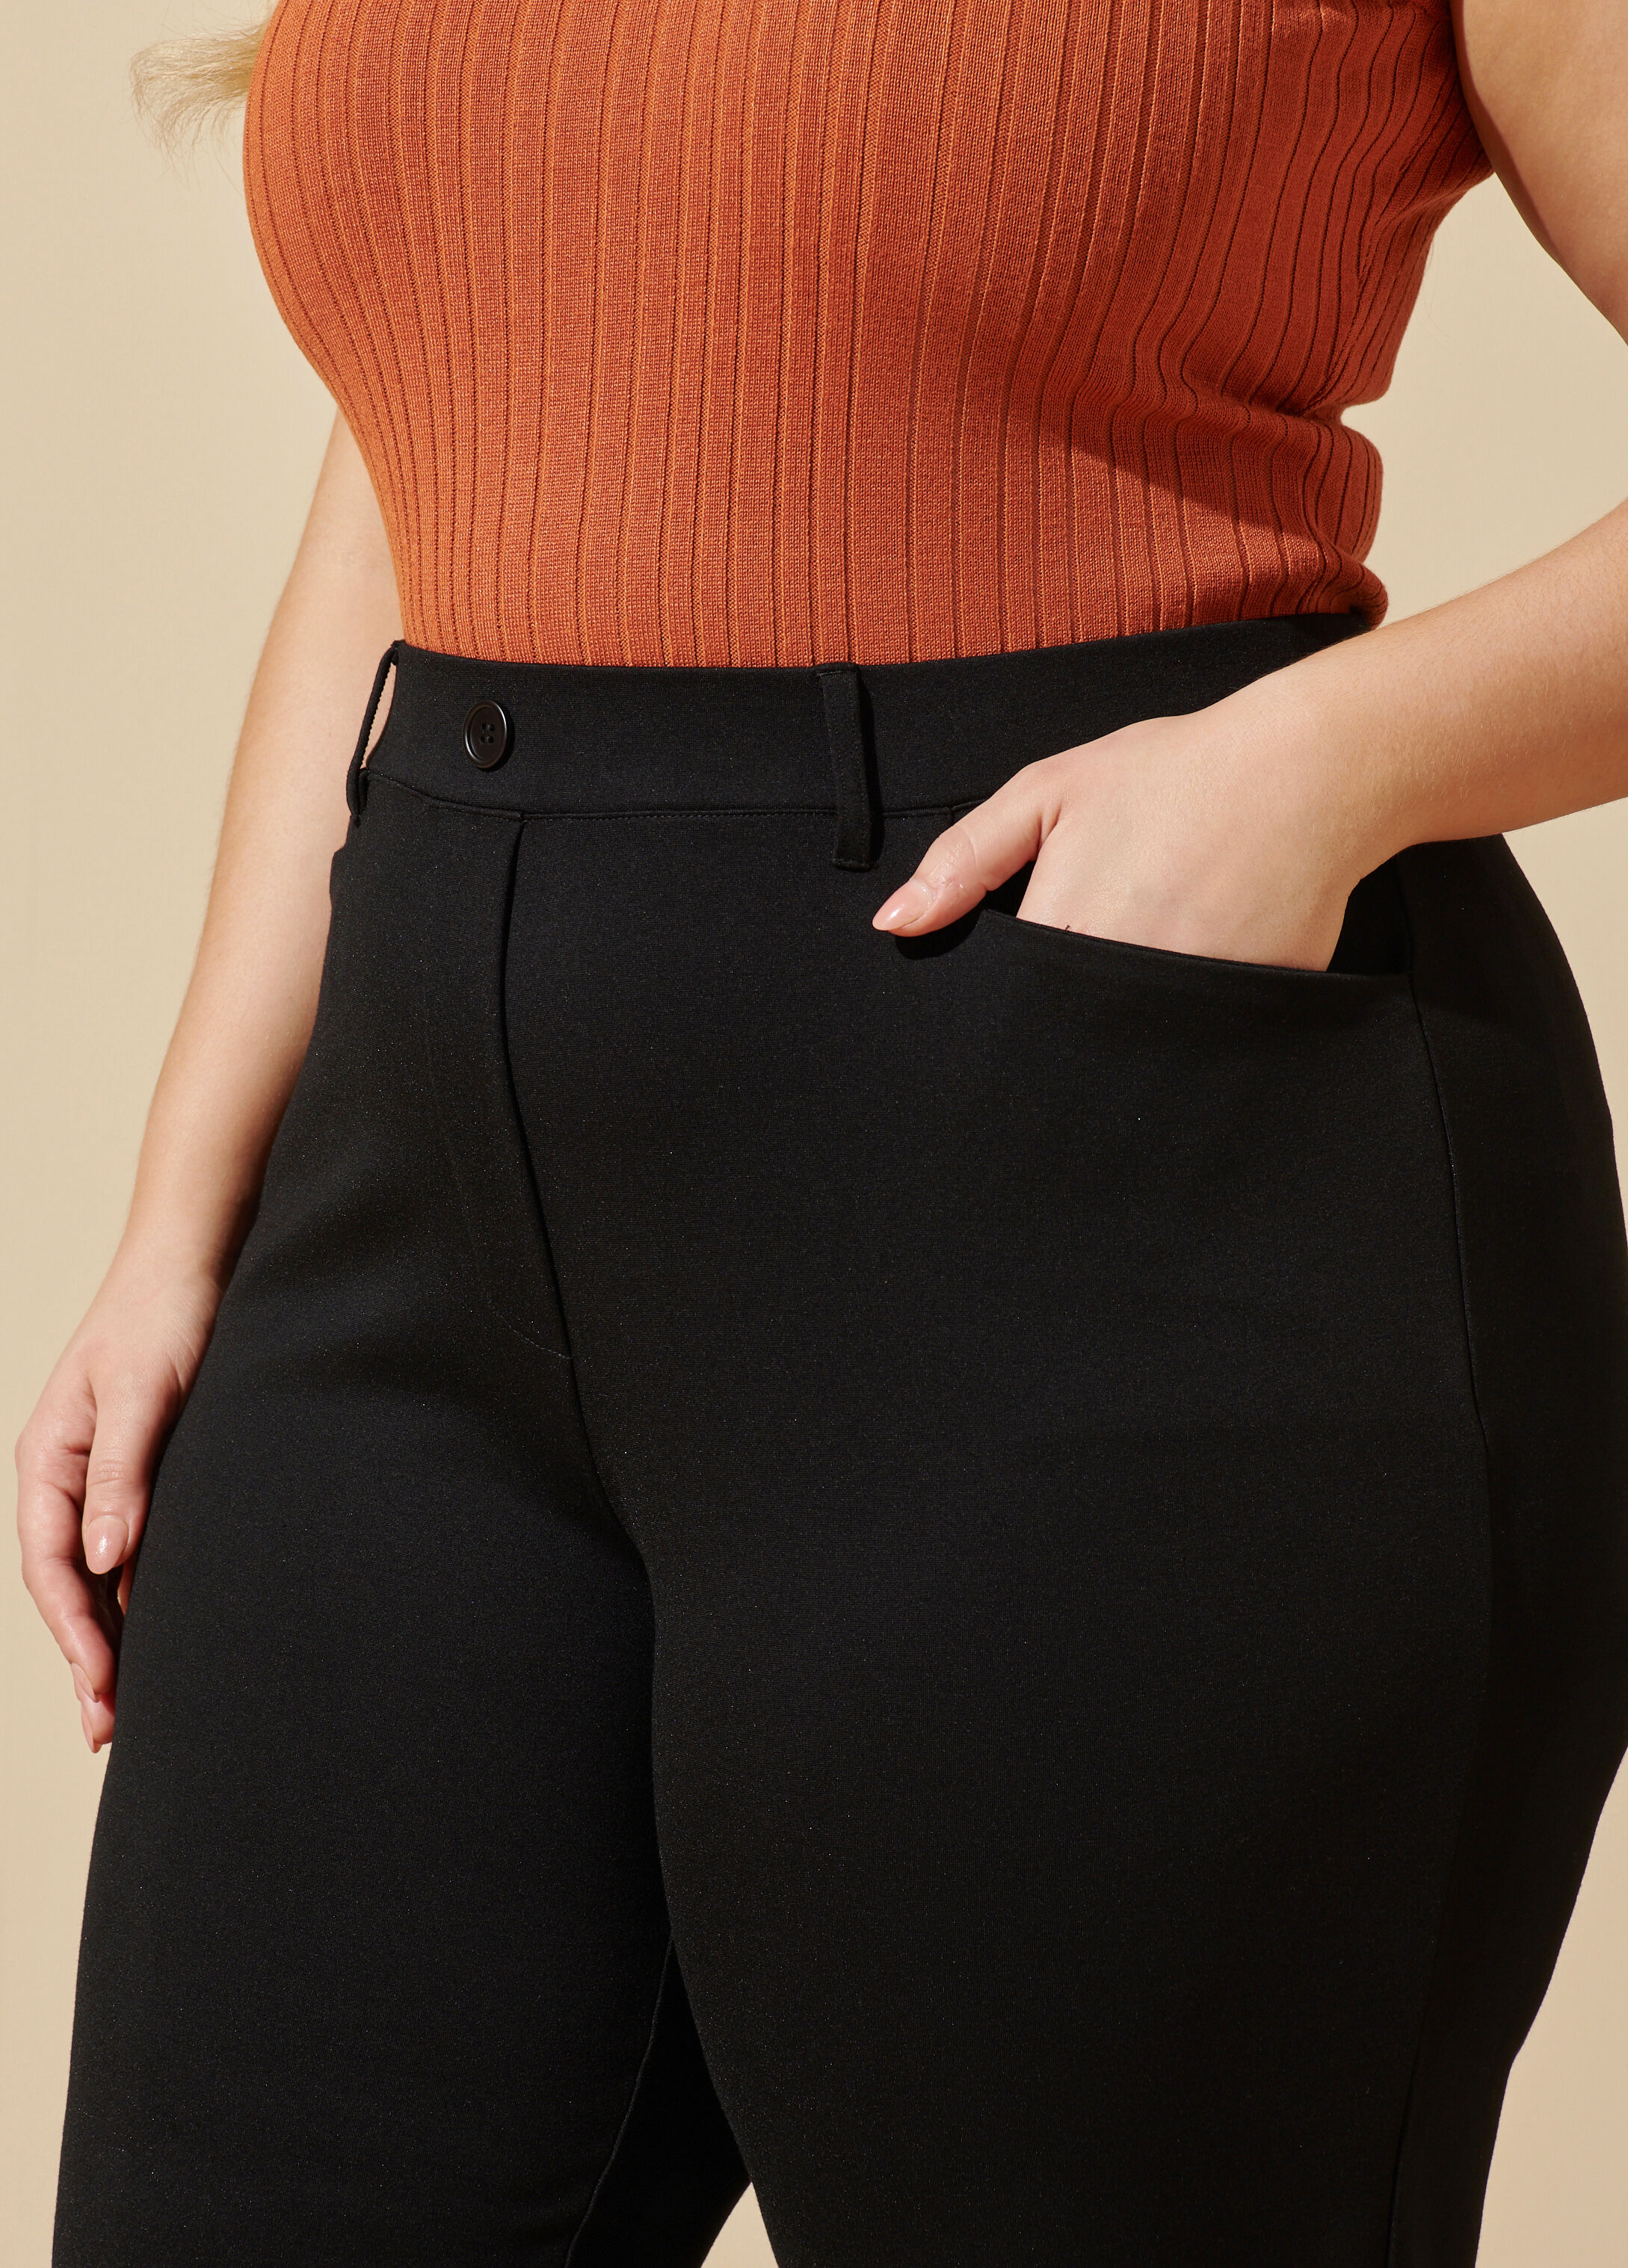 Plus Size Pants - Discover Pants At Suzanne Grae